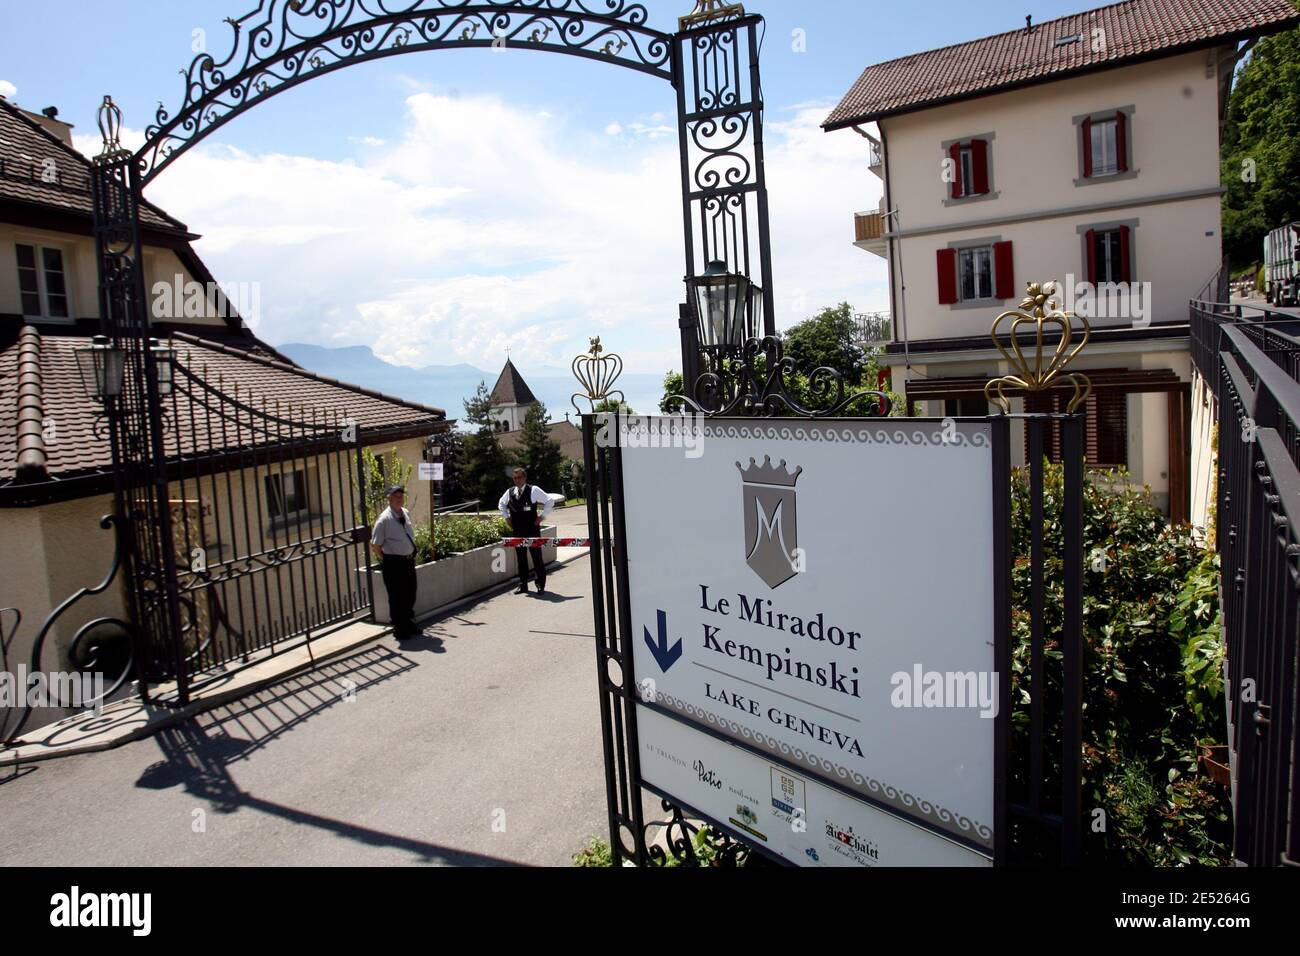 Illustration of 'Le Mirador Kempinski ' hotel in Mont-Pelerin, Switzerland on June 10, 2008. The hotel will host the French national team during the forthcoming 2008 UEFA Football Championship. Photo by Orban-Taamallah/Cameleon/ABACAPRESS.COM Stock Photo